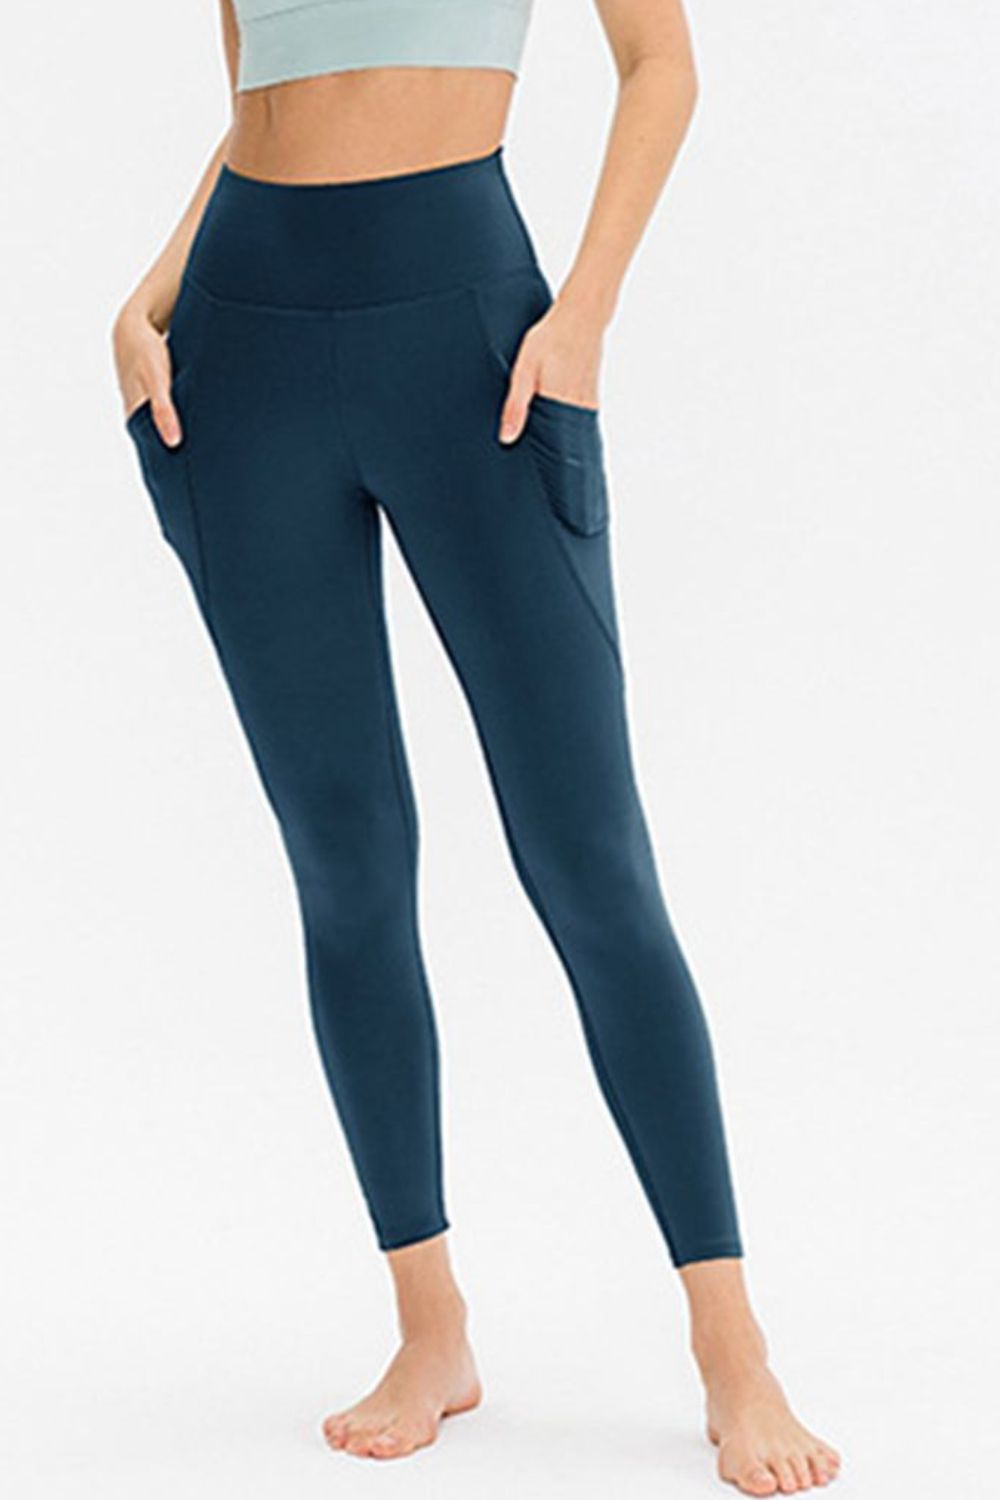 Joelle Slim Fit Long Active Leggings with Pockets